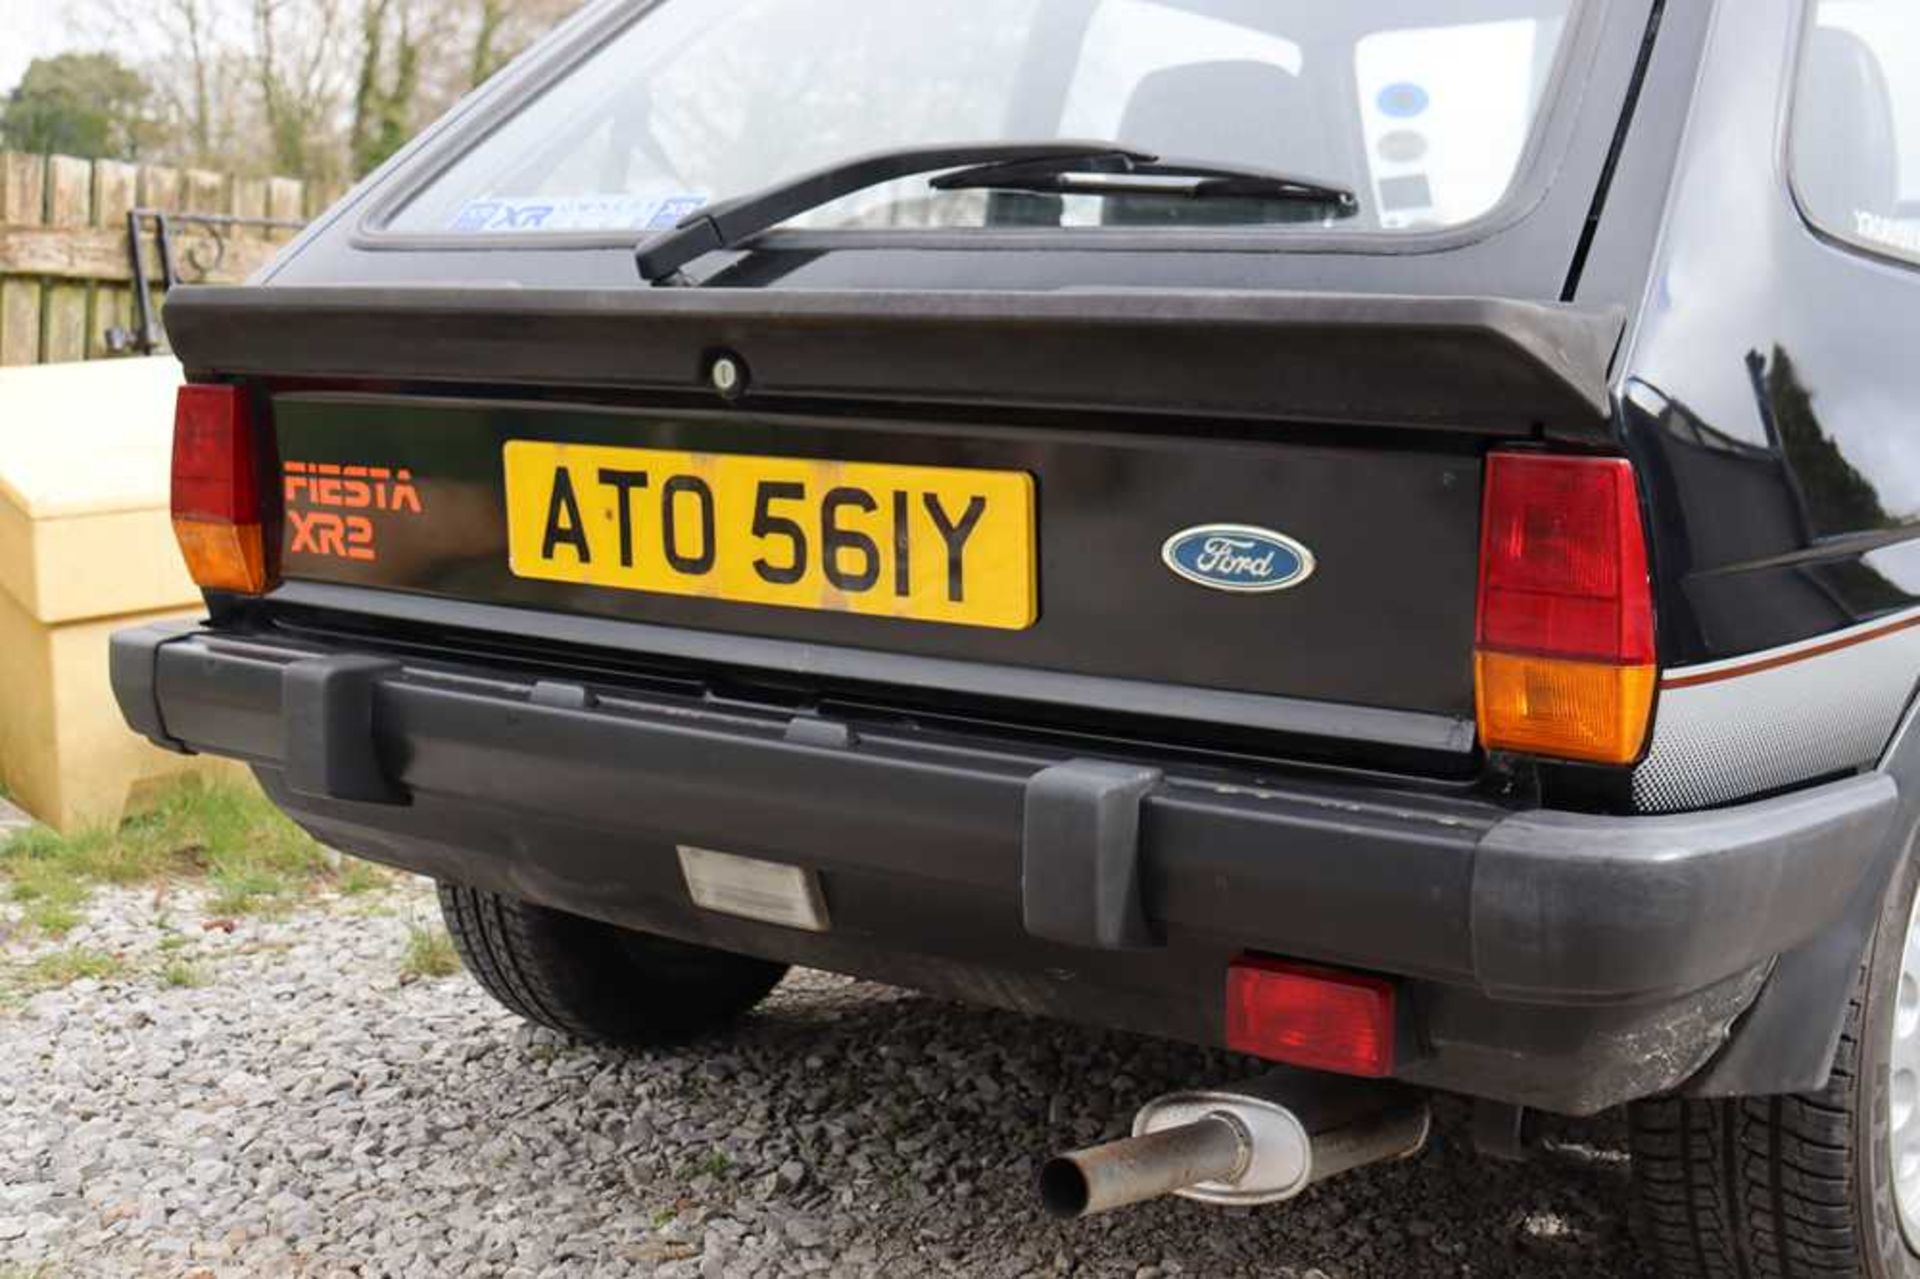 1983 Ford Fiesta XR2 - Image 44 of 56